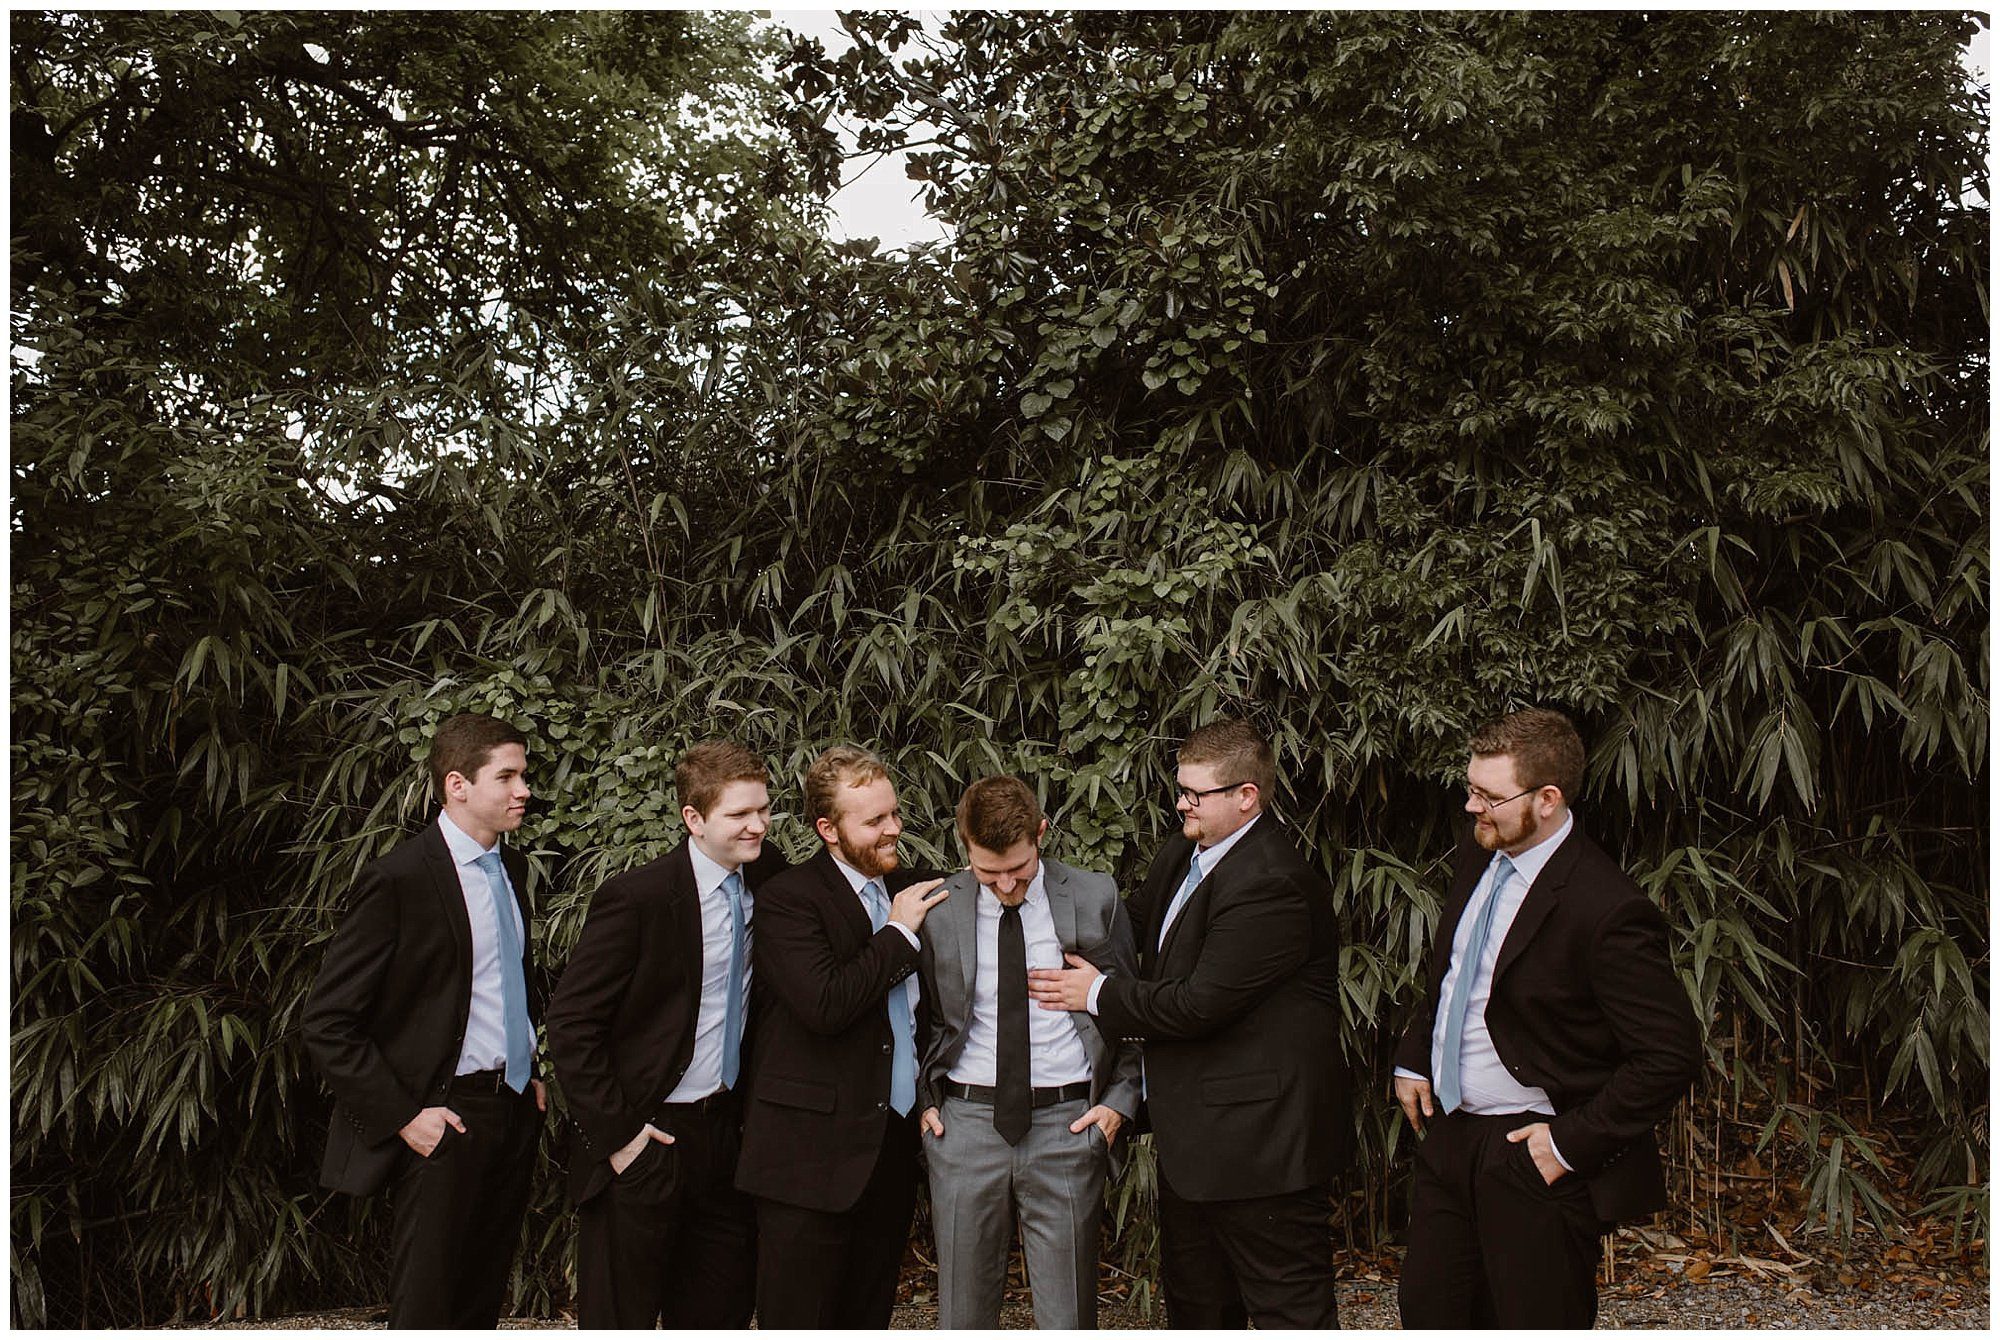 Groomsmen Photos at Crescent Bend House Wedding Knoxville